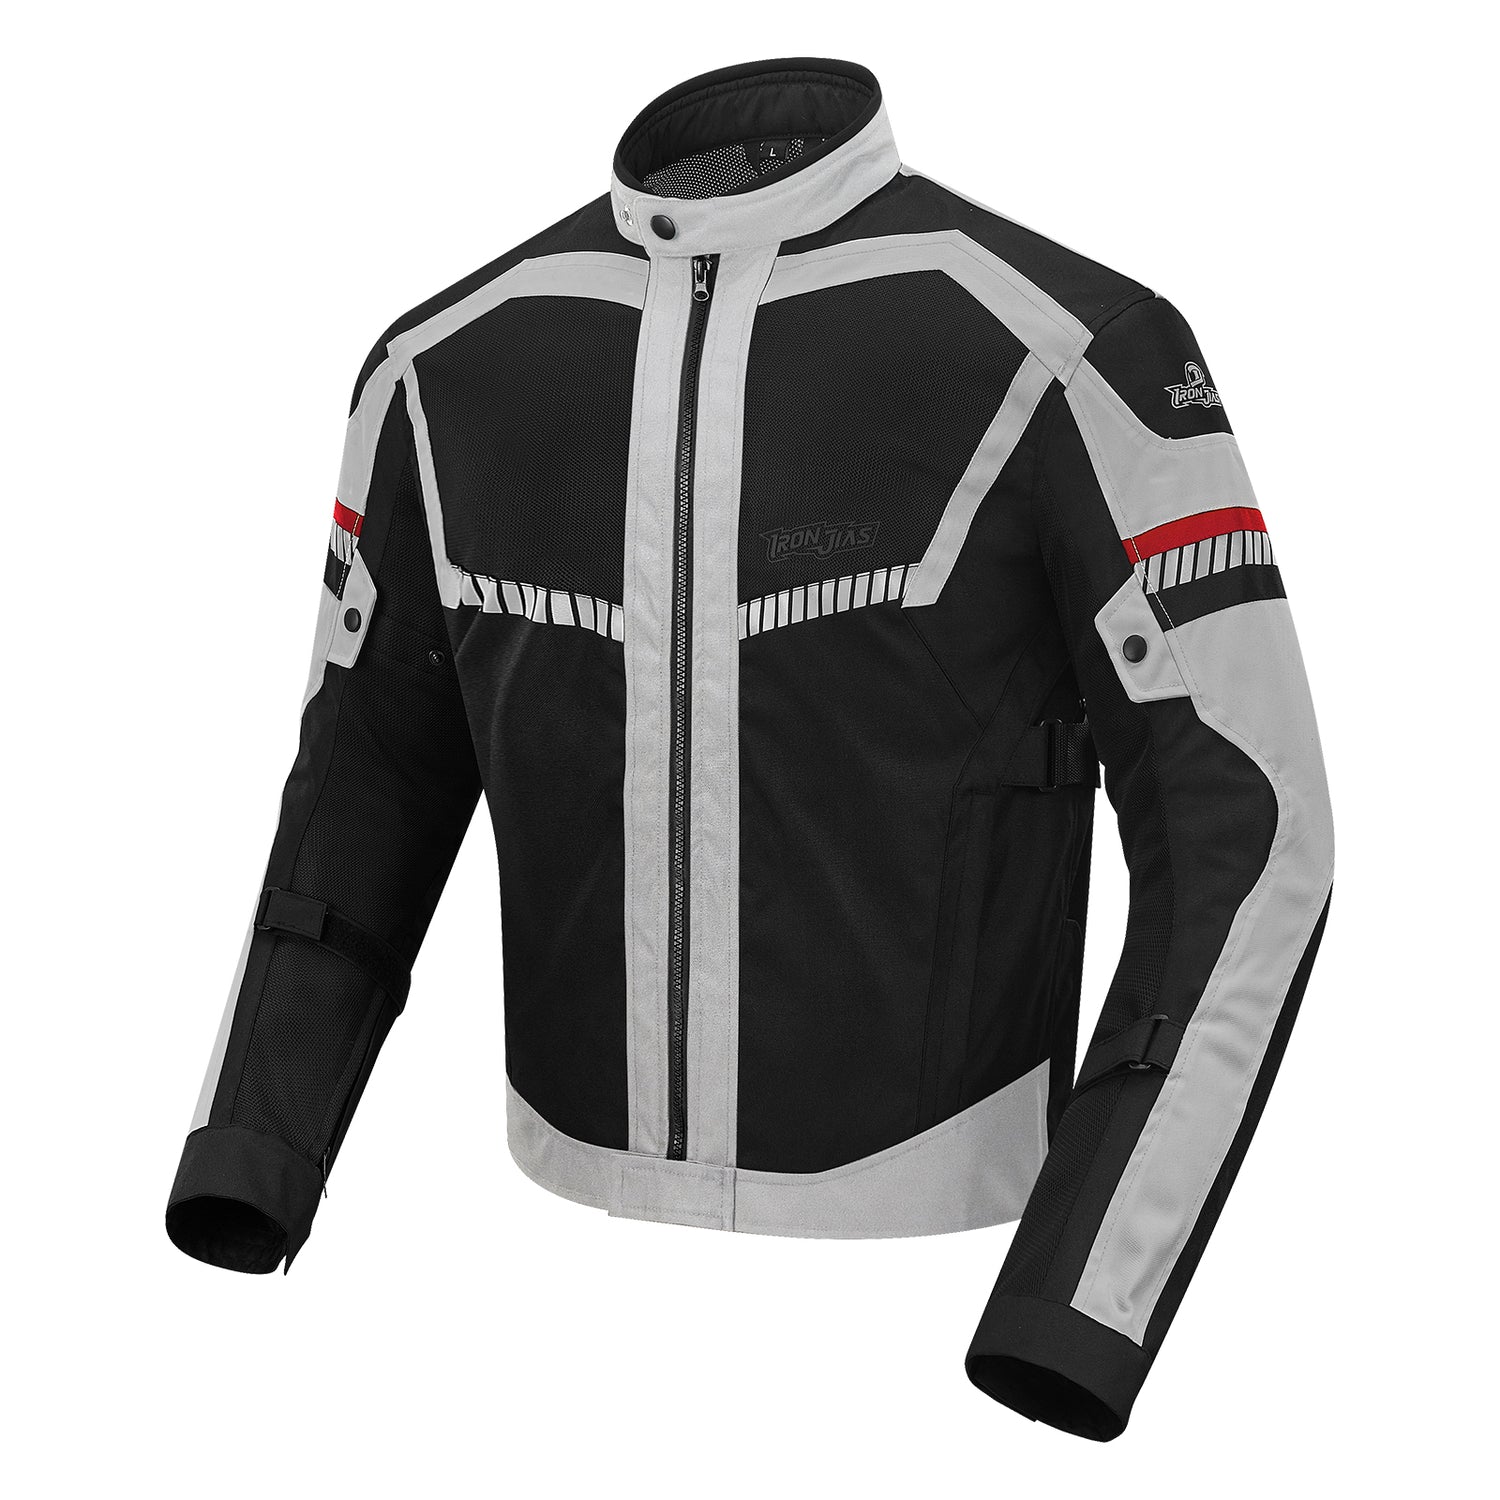 IRONJIAS Black White Breathable CE Protective Motorcycle Jacket | D-213